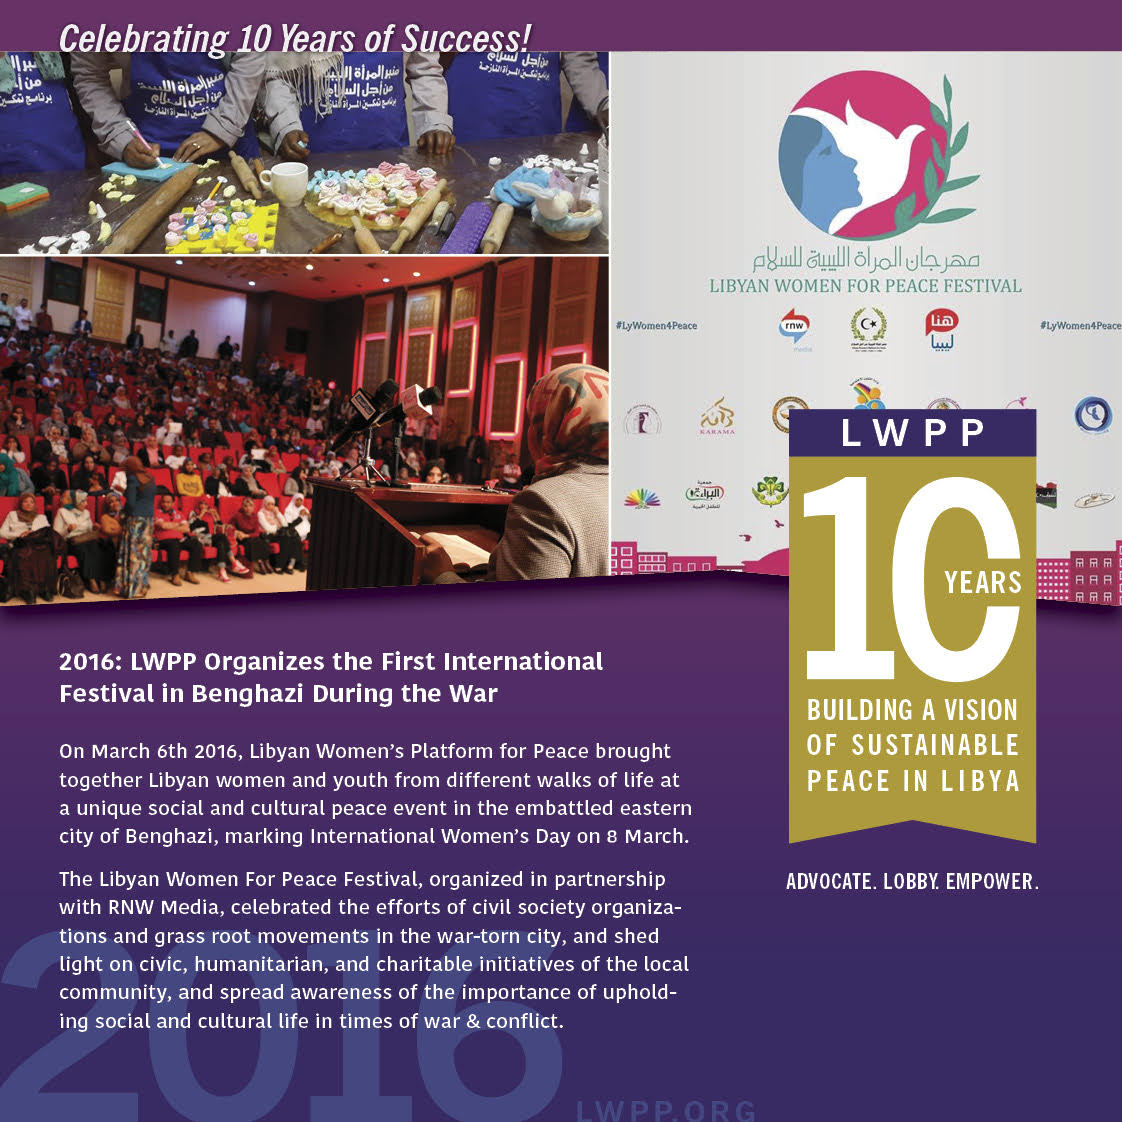 LWPP Organizes the First International Festival in Benghazi During the War